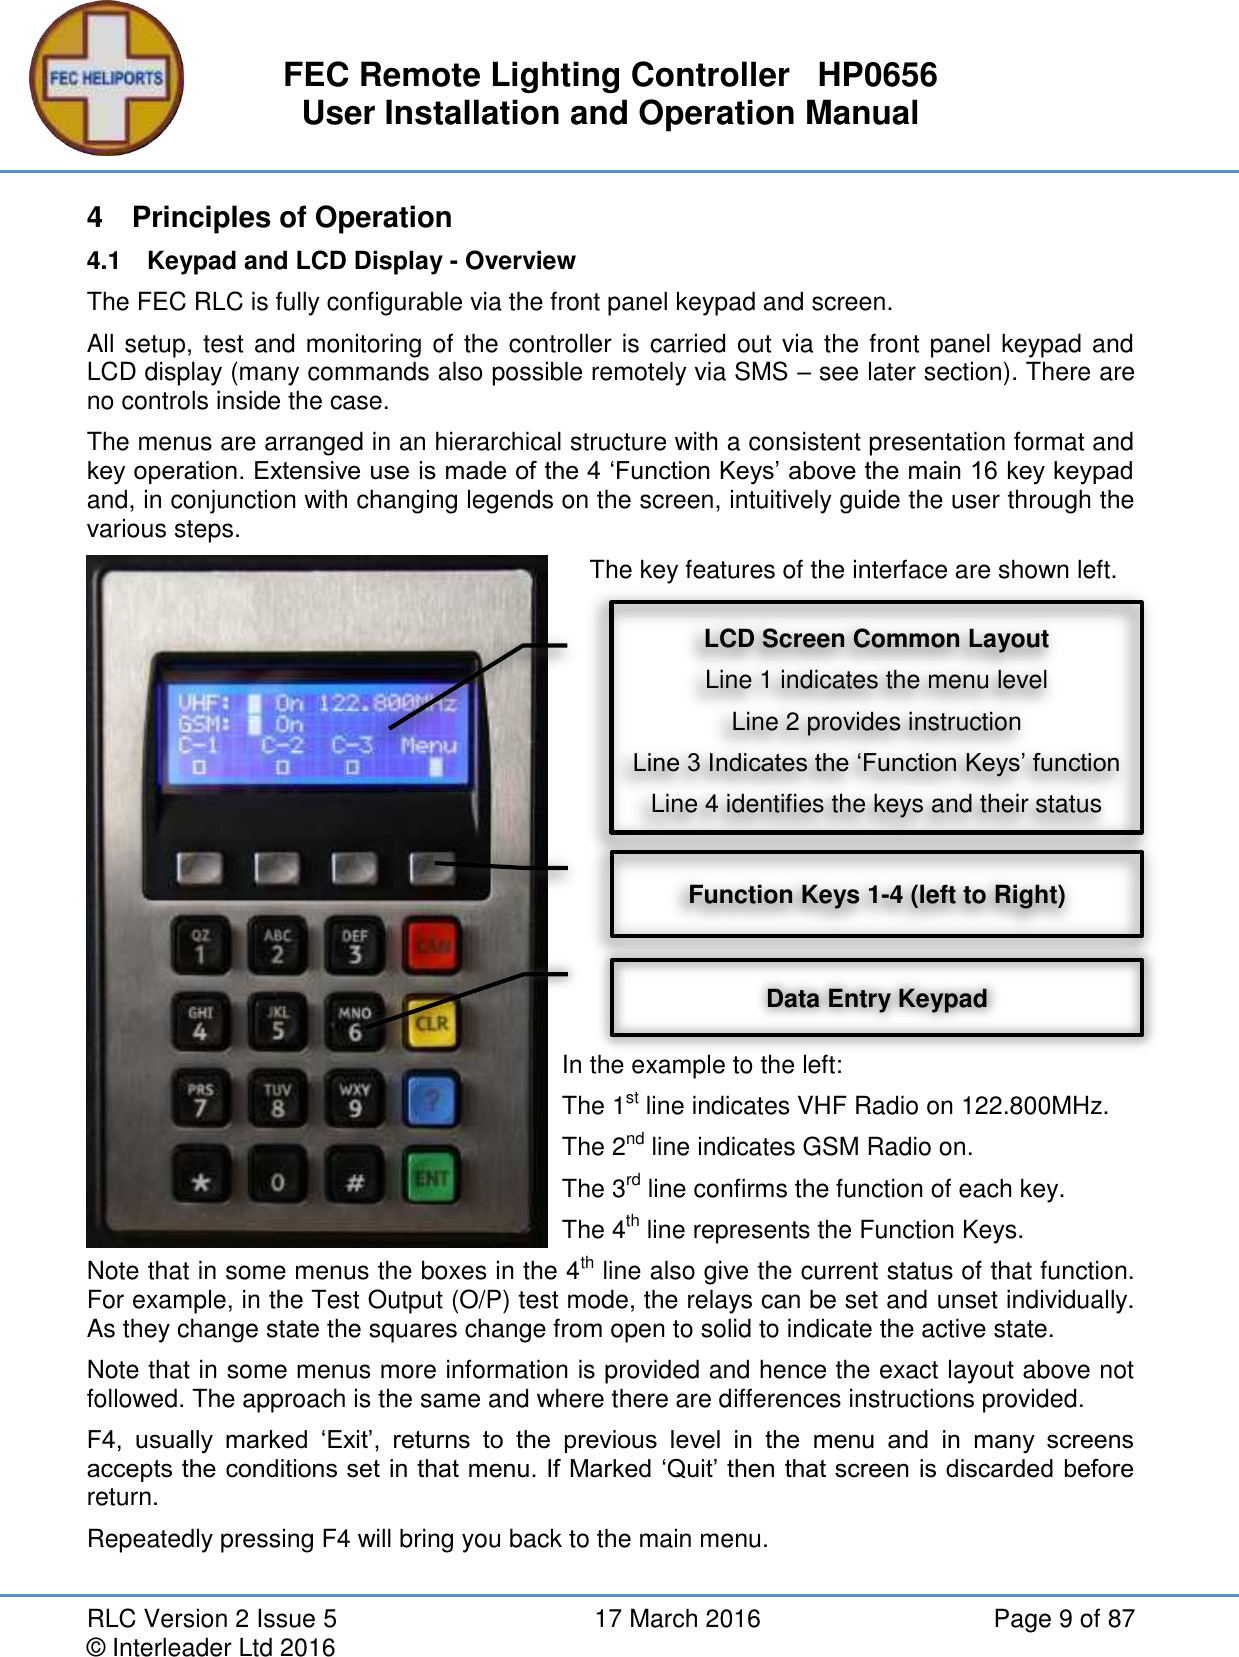 FEC Remote Lighting Controller   HP0656 User Installation and Operation Manual RLC Version 2 Issue 5  17 March 2016  Page 9 of 87 © Interleader Ltd 2016 4  Principles of Operation 4.1  Keypad and LCD Display - Overview The FEC RLC is fully configurable via the front panel keypad and screen. All setup, test and monitoring of the controller is carried out via the front panel keypad and LCD display (many commands also possible remotely via SMS – see later section). There are no controls inside the case.  The menus are arranged in an hierarchical structure with a consistent presentation format and key operation. Extensive use is made of the 4 ‘Function Keys’ above the main 16 key keypad and, in conjunction with changing legends on the screen, intuitively guide the user through the various steps.     The key features of the interface are shown left.            In the example to the left:  The 1st line indicates VHF Radio on 122.800MHz. The 2nd line indicates GSM Radio on. The 3rd line confirms the function of each key. The 4th line represents the Function Keys.  Note that in some menus the boxes in the 4th line also give the current status of that function. For example, in the Test Output (O/P) test mode, the relays can be set and unset individually. As they change state the squares change from open to solid to indicate the active state. Note that in some menus more information is provided and hence the exact layout above not followed. The approach is the same and where there are differences instructions provided. F4,  usually  marked  ‘Exit’,  returns  to  the  previous  level  in  the  menu  and  in  many  screens accepts the conditions set in that menu. If Marked ‘Quit’ then that screen is discarded before return. Repeatedly pressing F4 will bring you back to the main menu.   LCD Screen Common Layout Line 1 indicates the menu level Line 2 provides instruction Line 3 Indicates the ‘Function Keys’ function Line 4 identifies the keys and their status Function Keys 1-4 (left to Right) Data Entry Keypad 